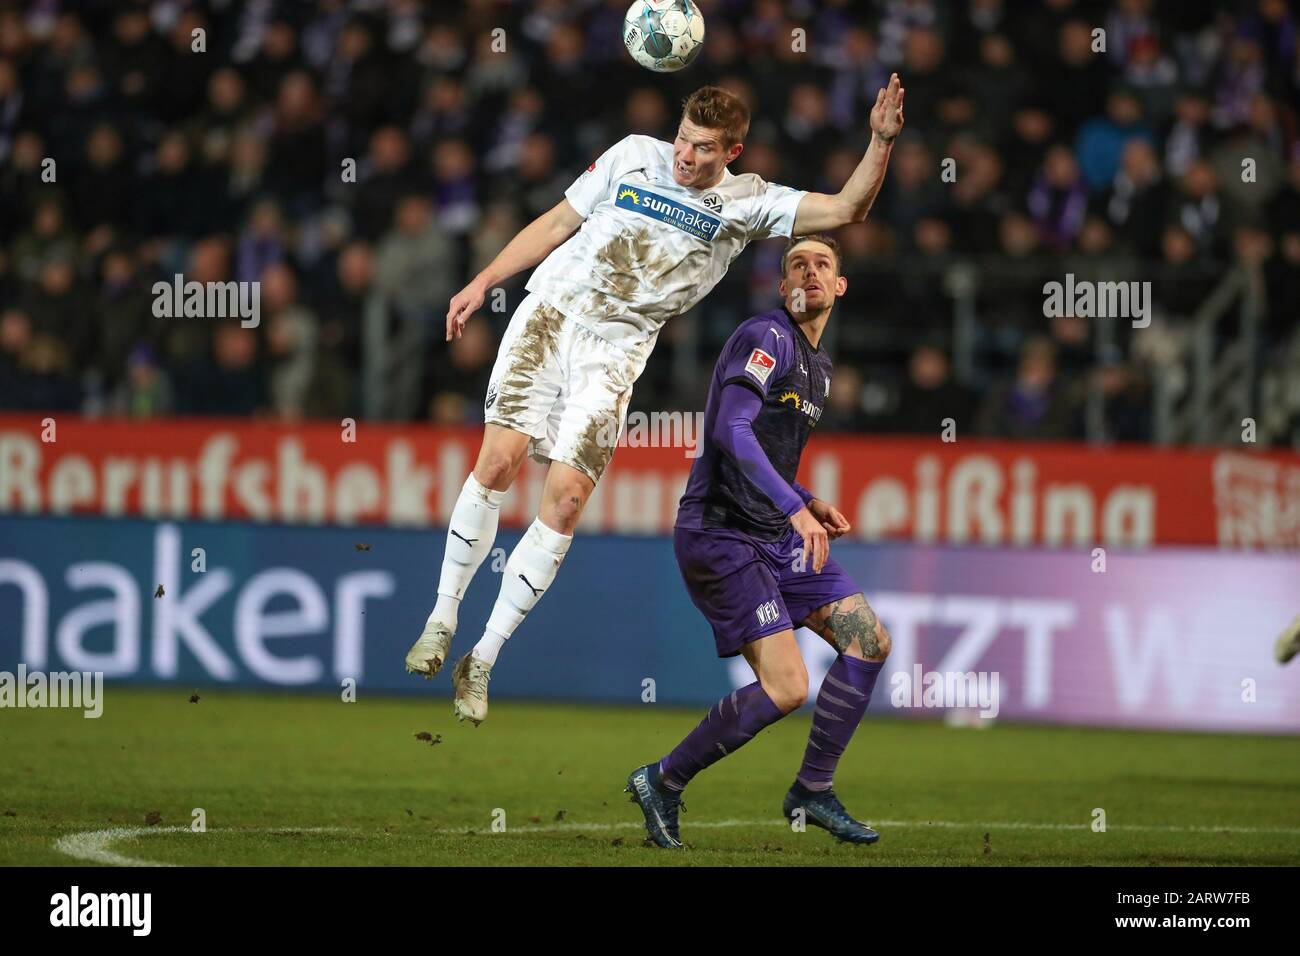 29 January 2020, Lower Saxony, Osnabrück: Football: 2nd Bundesliga, VfL Osnabrück - SV Sandhausen, 19th matchday in the stadium at Bremer Brücke. Osnabrück's Maurice Trapp (r) fighting for the ball with Kevin Behrens from Sandhausen. Photo: Friso Gentsch/dpa - IMPORTANT NOTE: In accordance with the regulations of the DFL Deutsche Fußball Liga and the DFB Deutscher Fußball-Bund, it is prohibited to exploit or have exploited in the stadium and/or from the game taken photographs in the form of sequence images and/or video-like photo series. Stock Photo